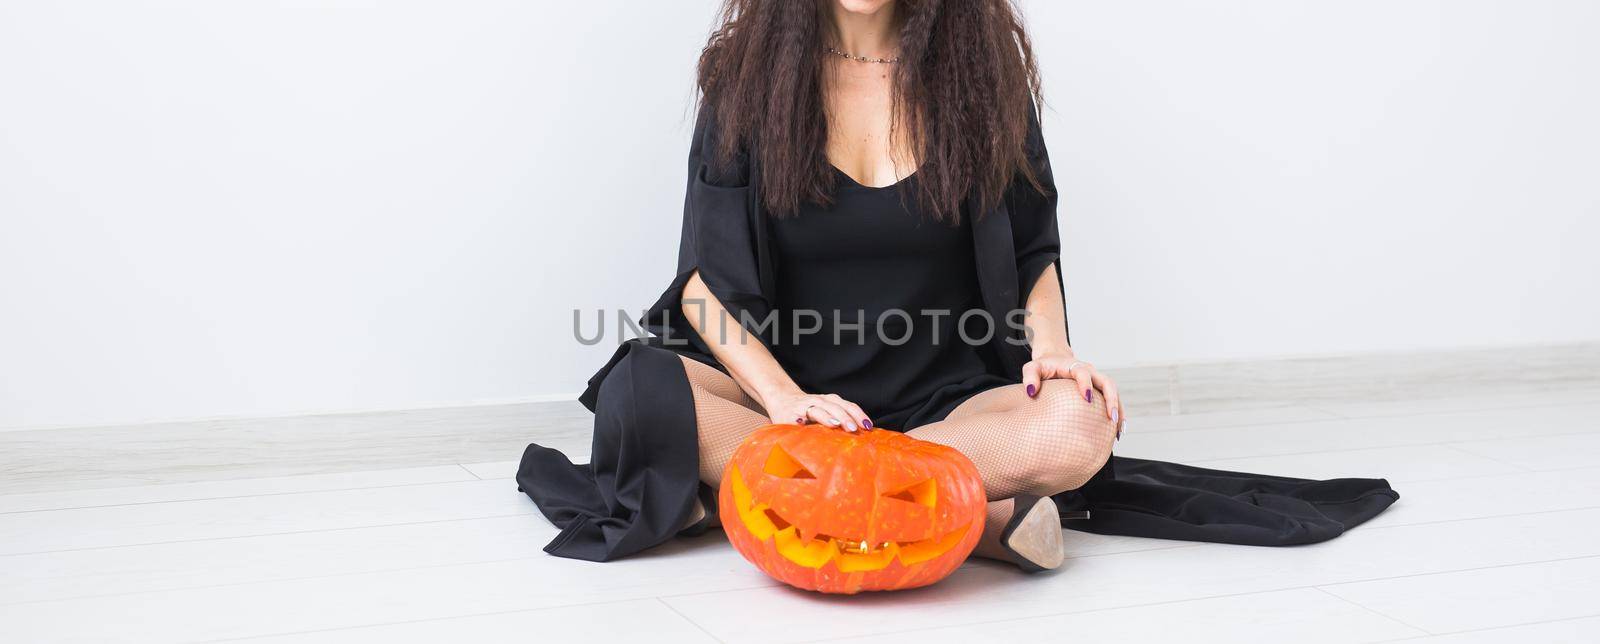 Halloween and masquerade concept - Beautiful close-up young woman posing with Pumpkin Jack-o'-lantern by Satura86